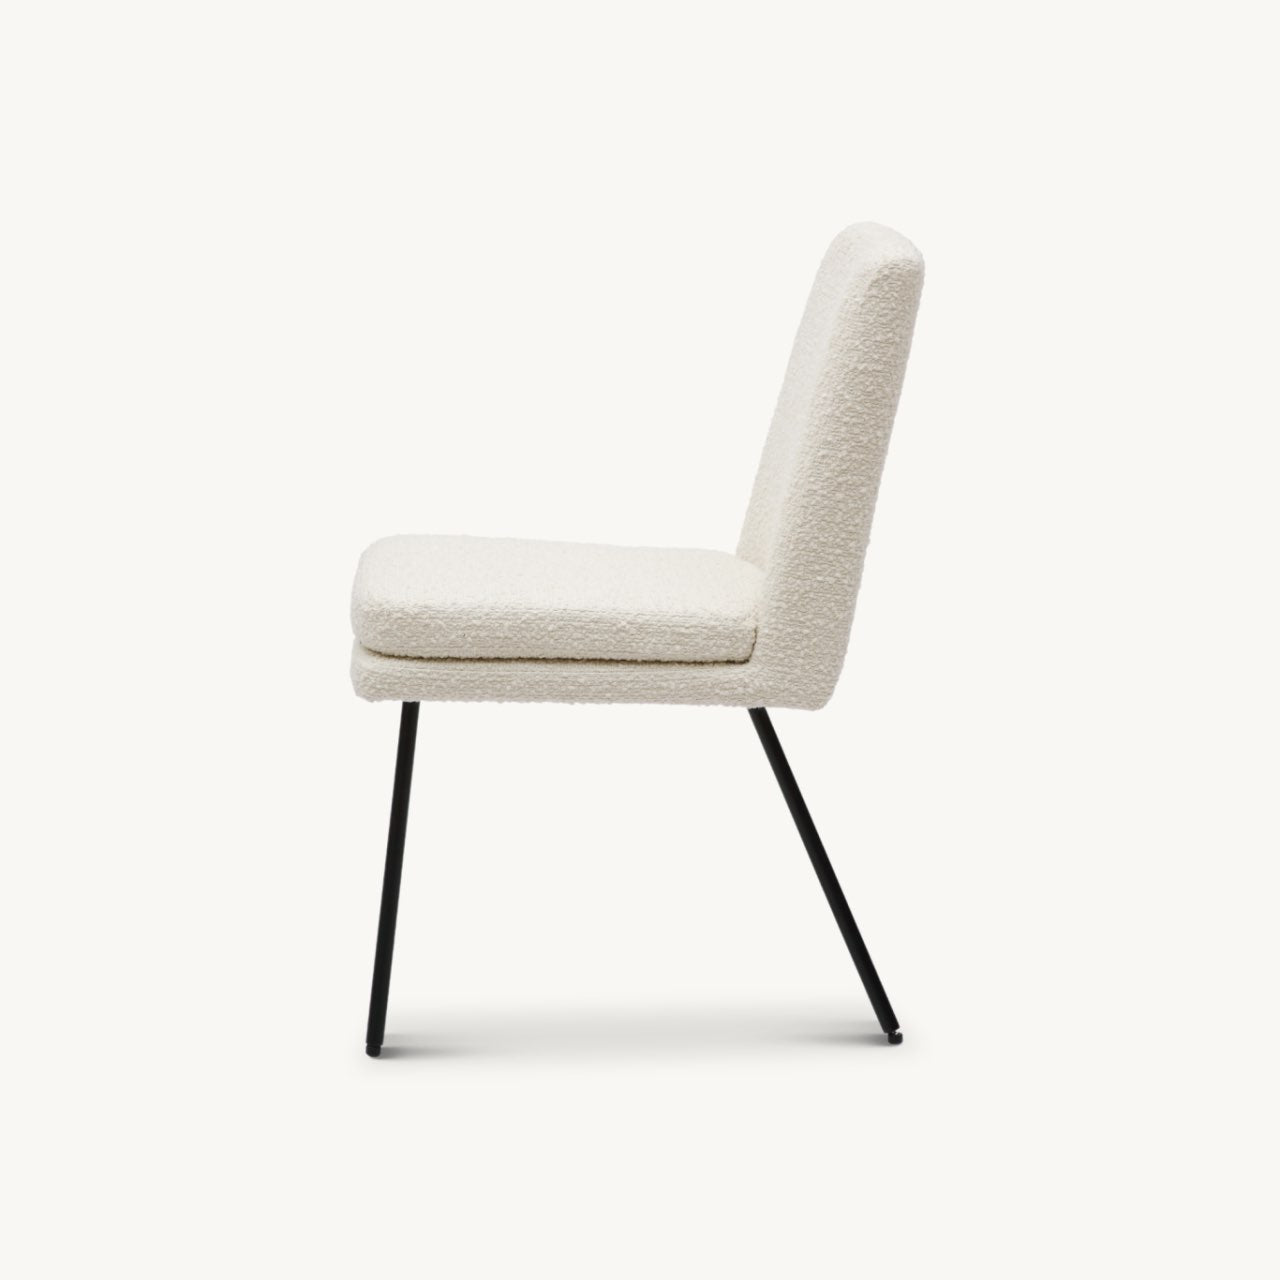 comfortable, fully upholstered minimal dining chair in ivory boucle fabric